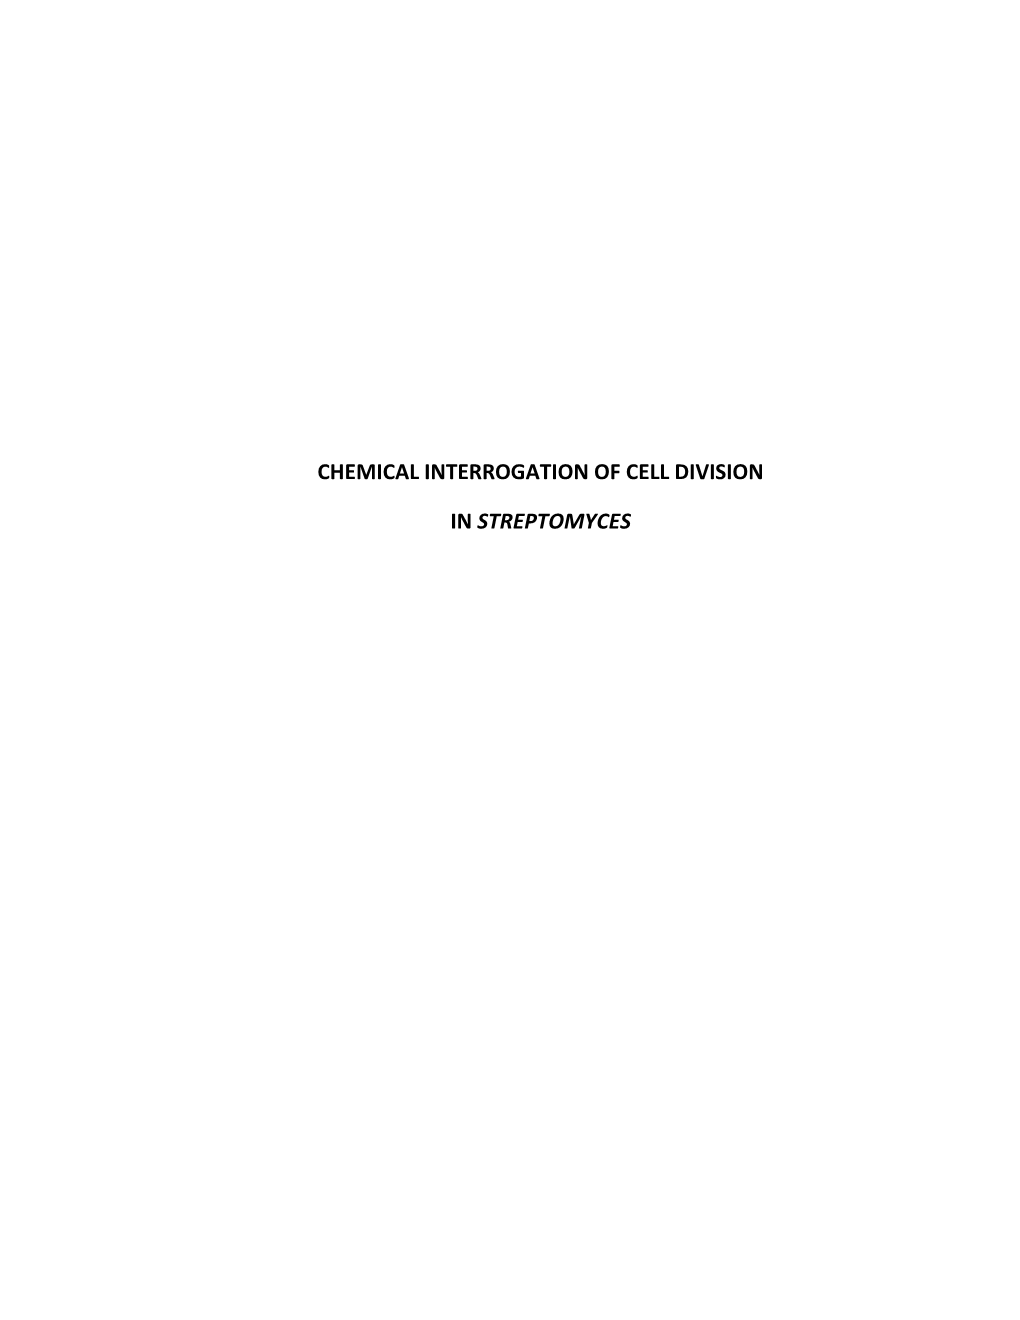 Chemical Interrogation of Cell Division in Streptomyces